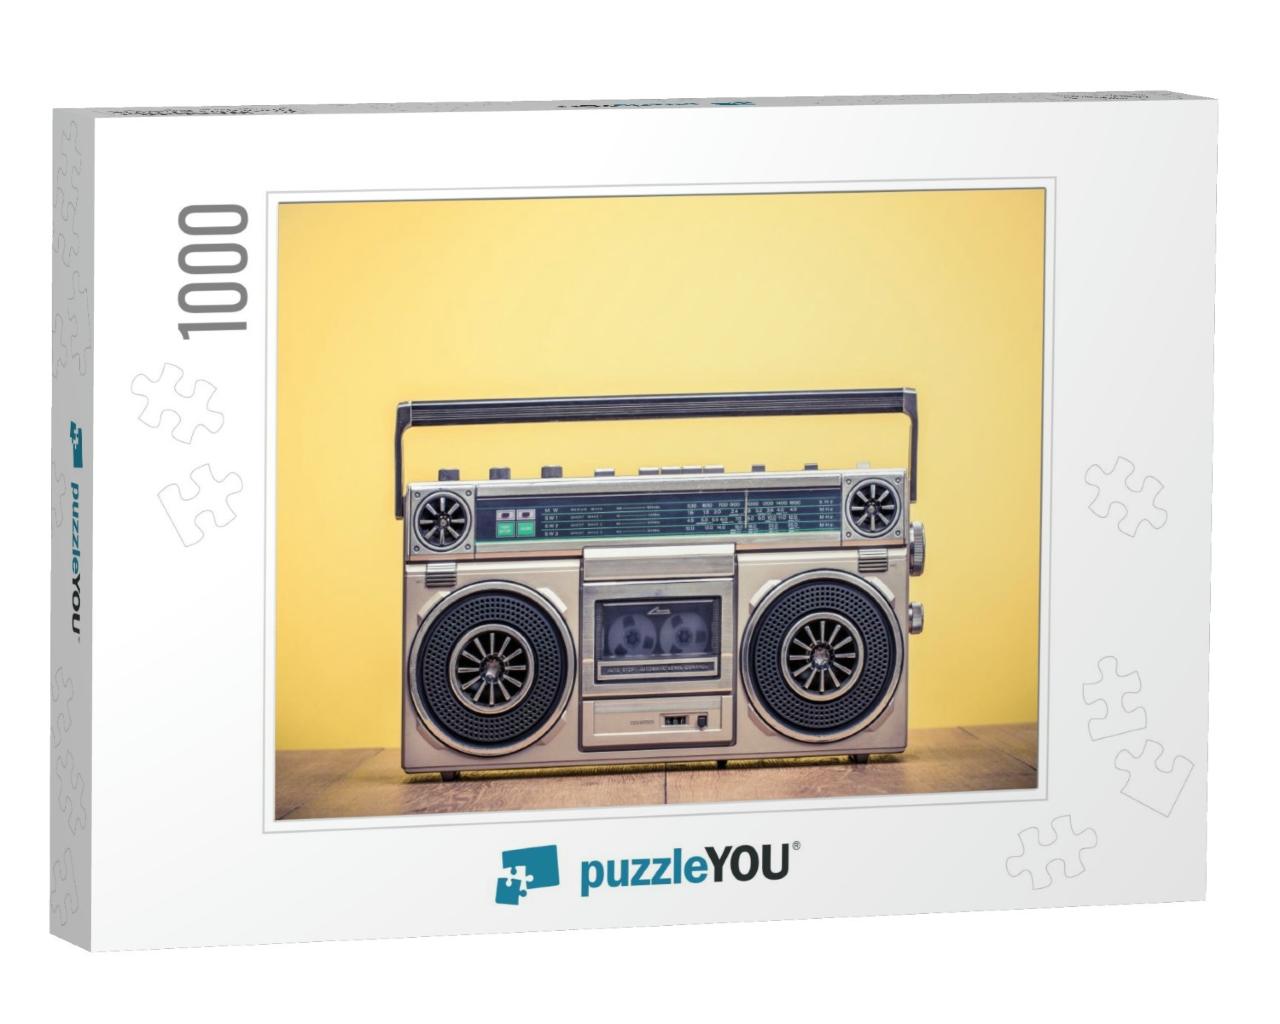 Retro Outdated Portable Stereo Boombox Radio Cassette Rec... Jigsaw Puzzle with 1000 pieces